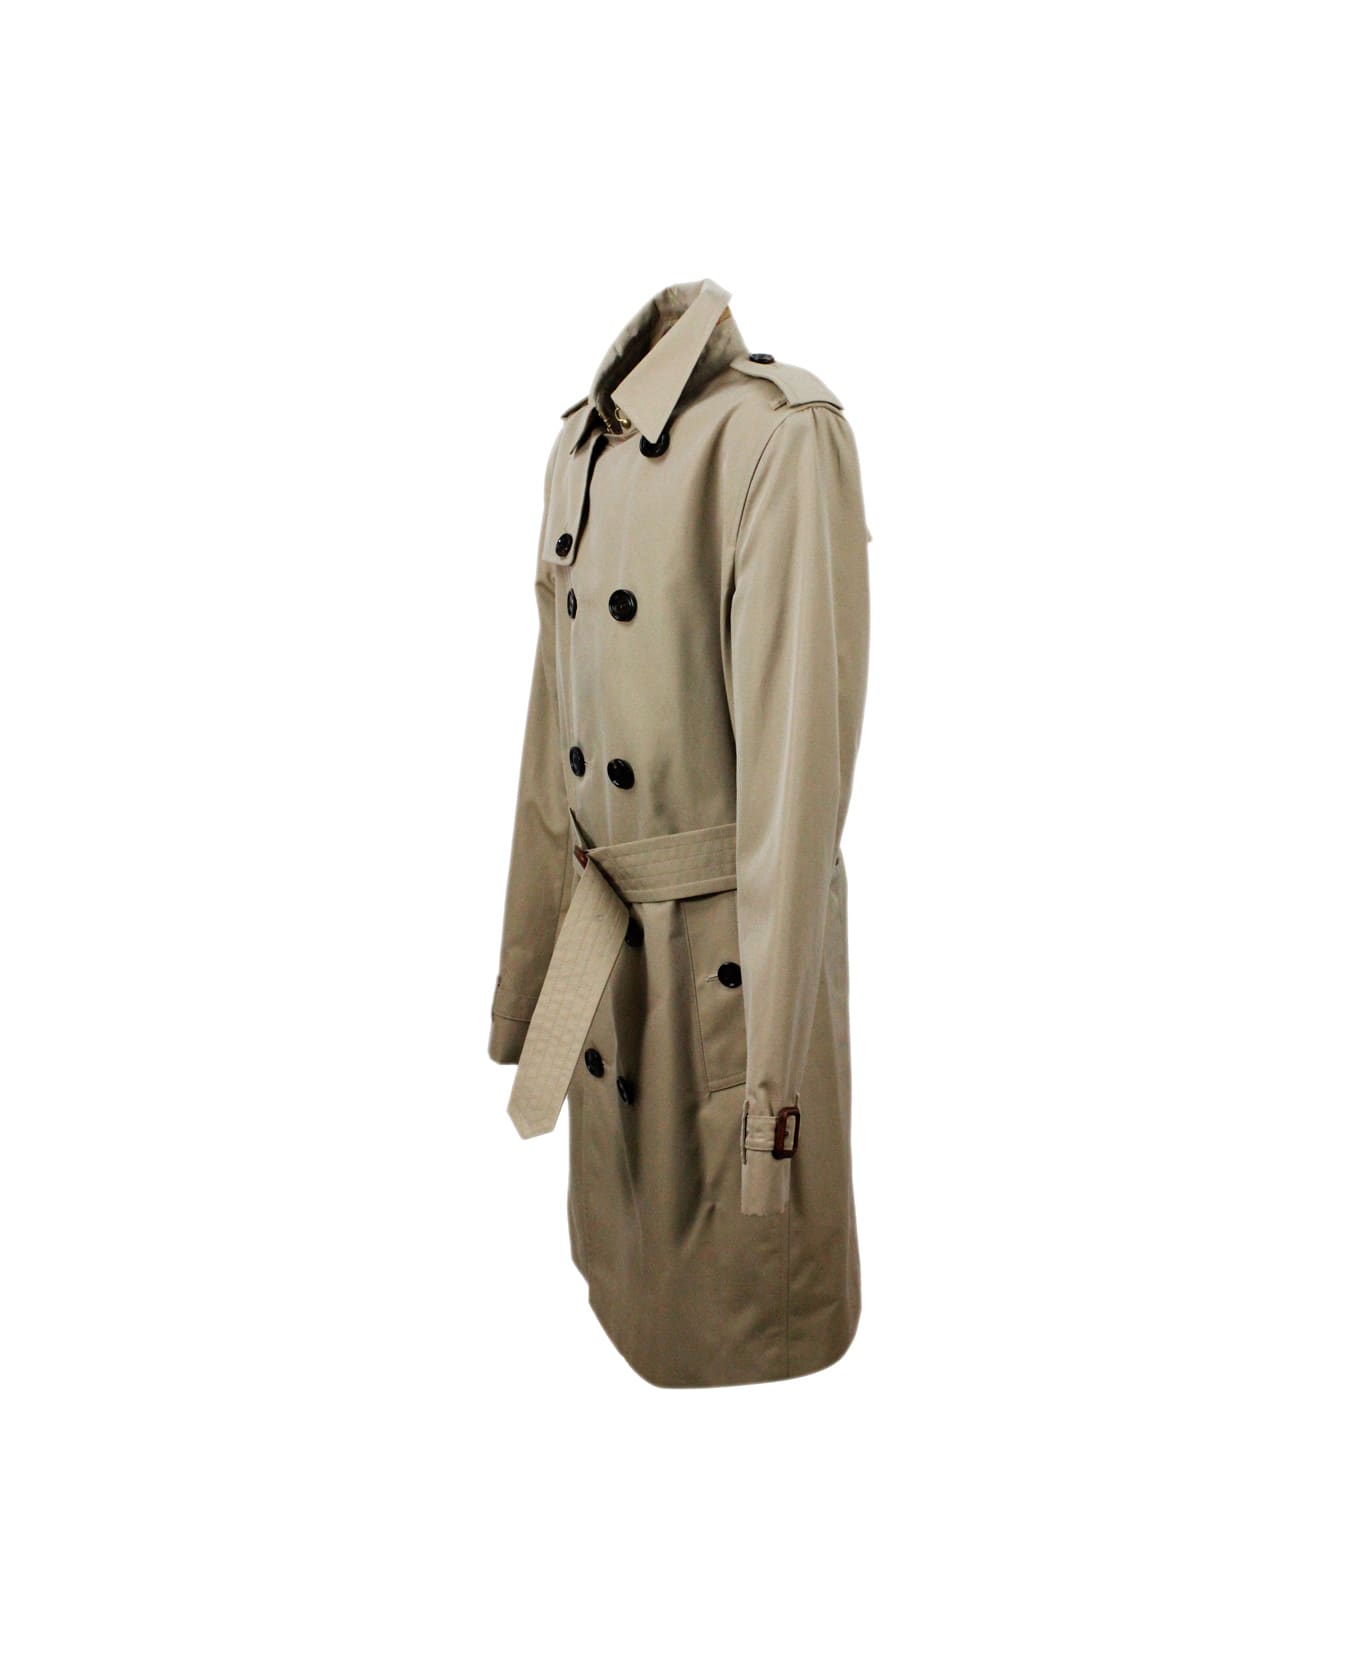 Burberry Trench Coat In Cotton Gabardine With Buttons And Belt With Check Interior - Beige